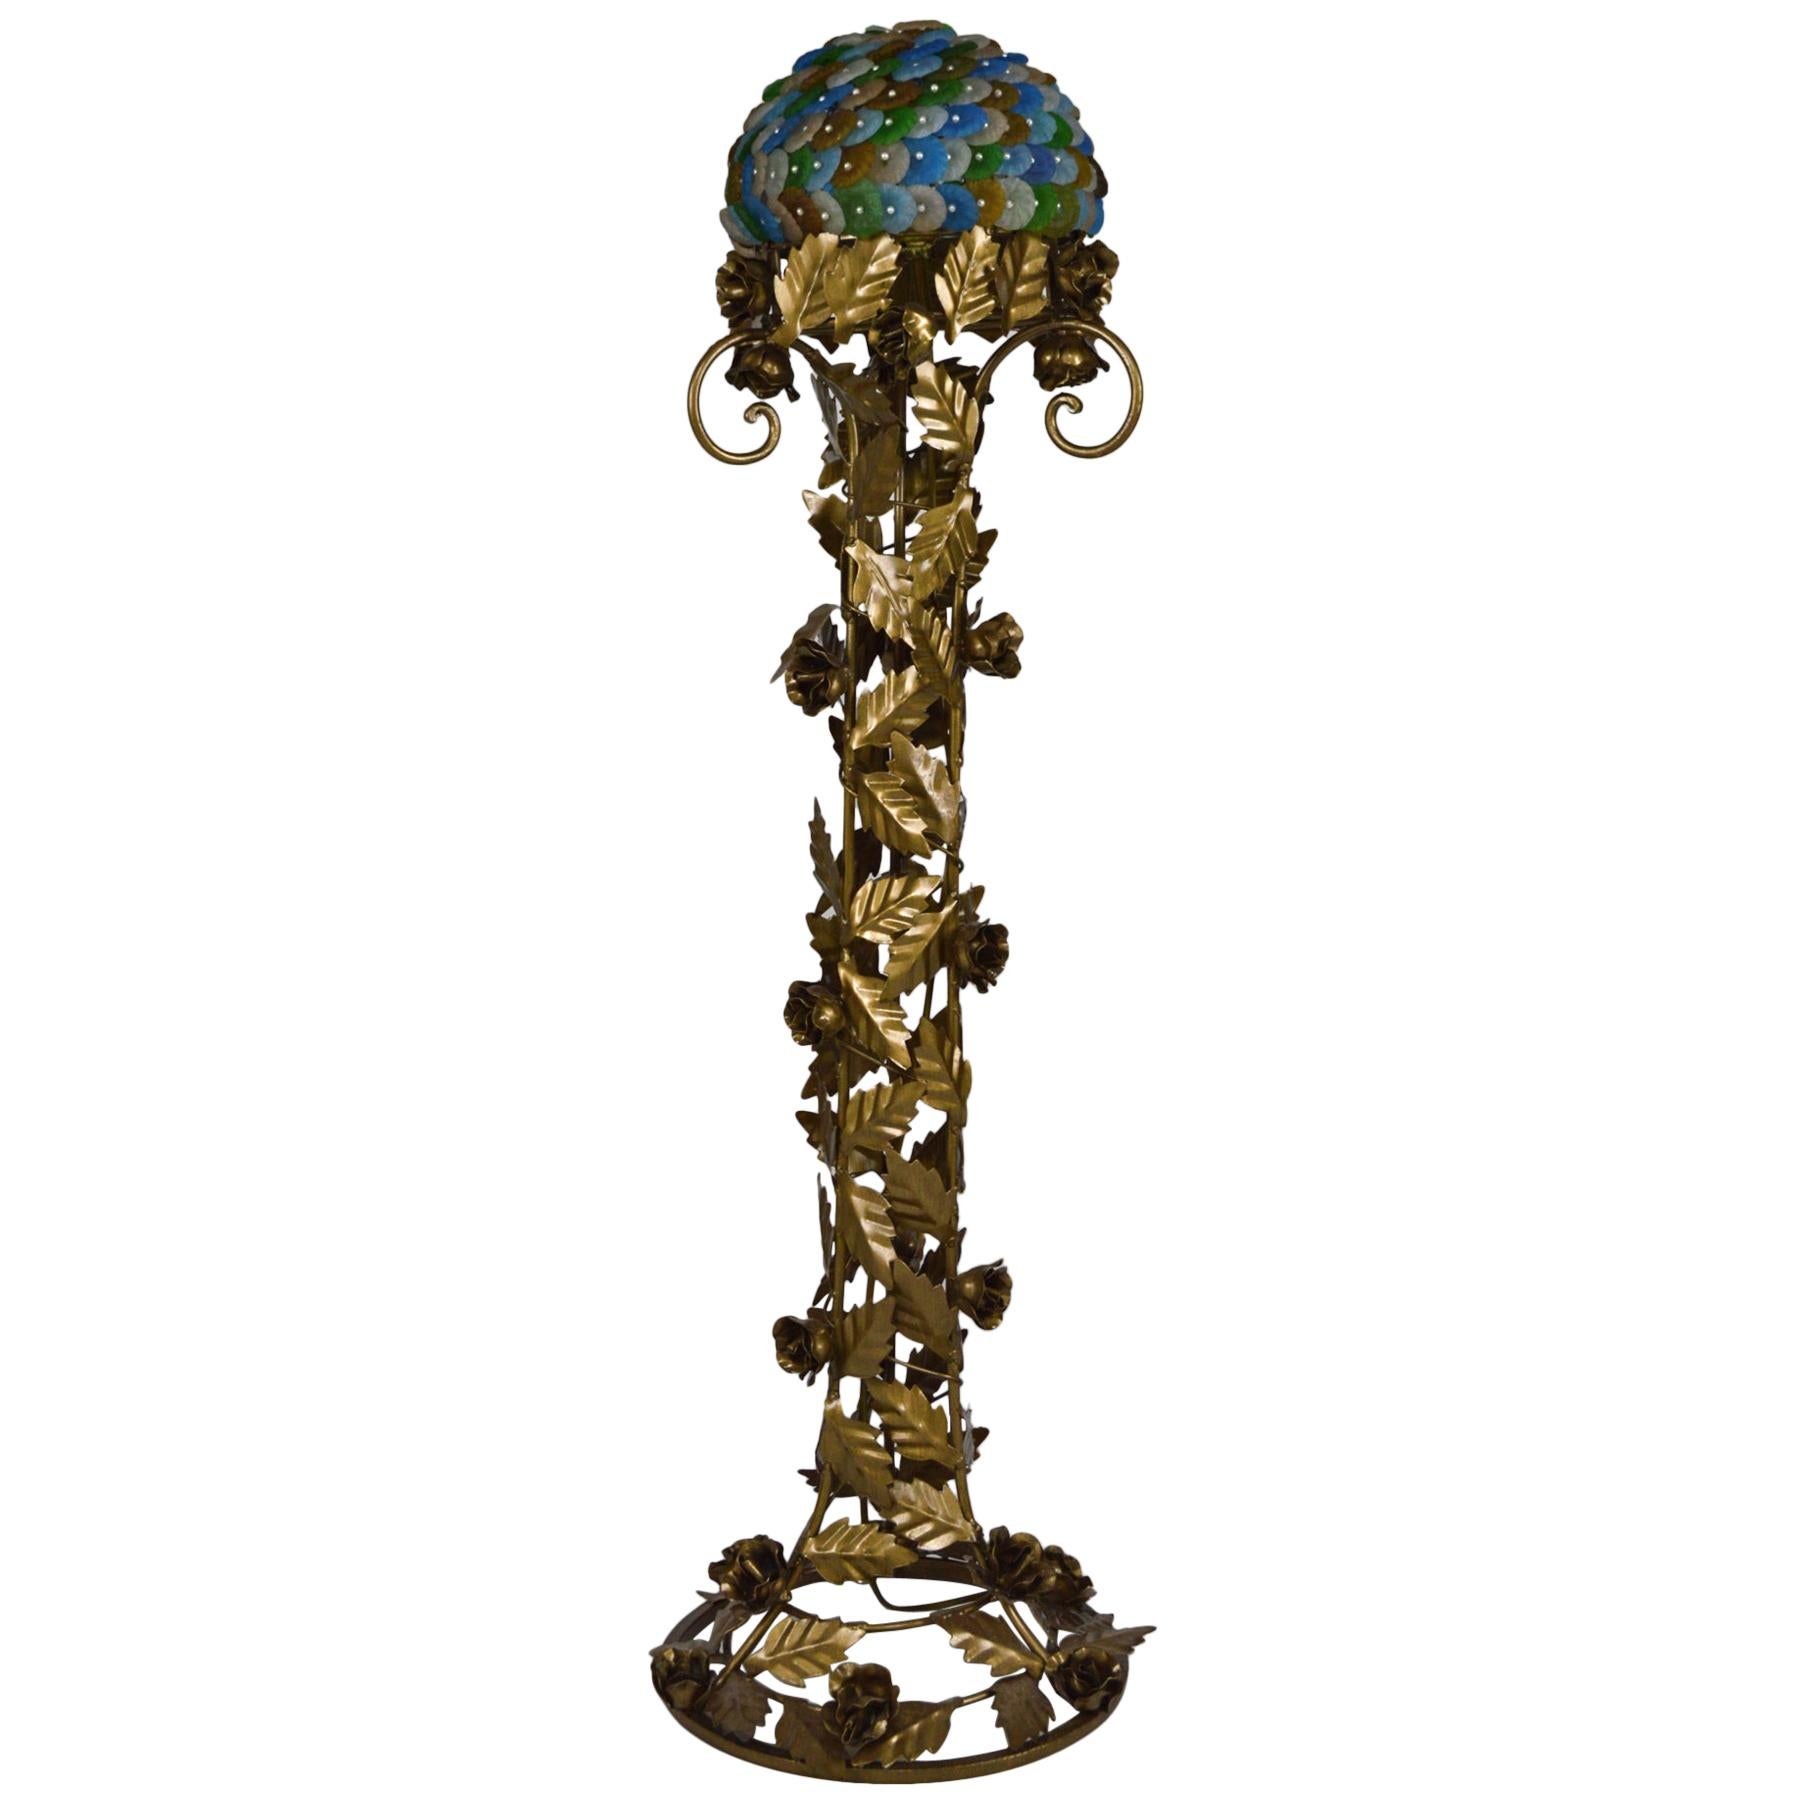 Floral Art Deco Floor Lamp in Gilded Wrought Iron & Glass Flowers, circa 1930 For Sale